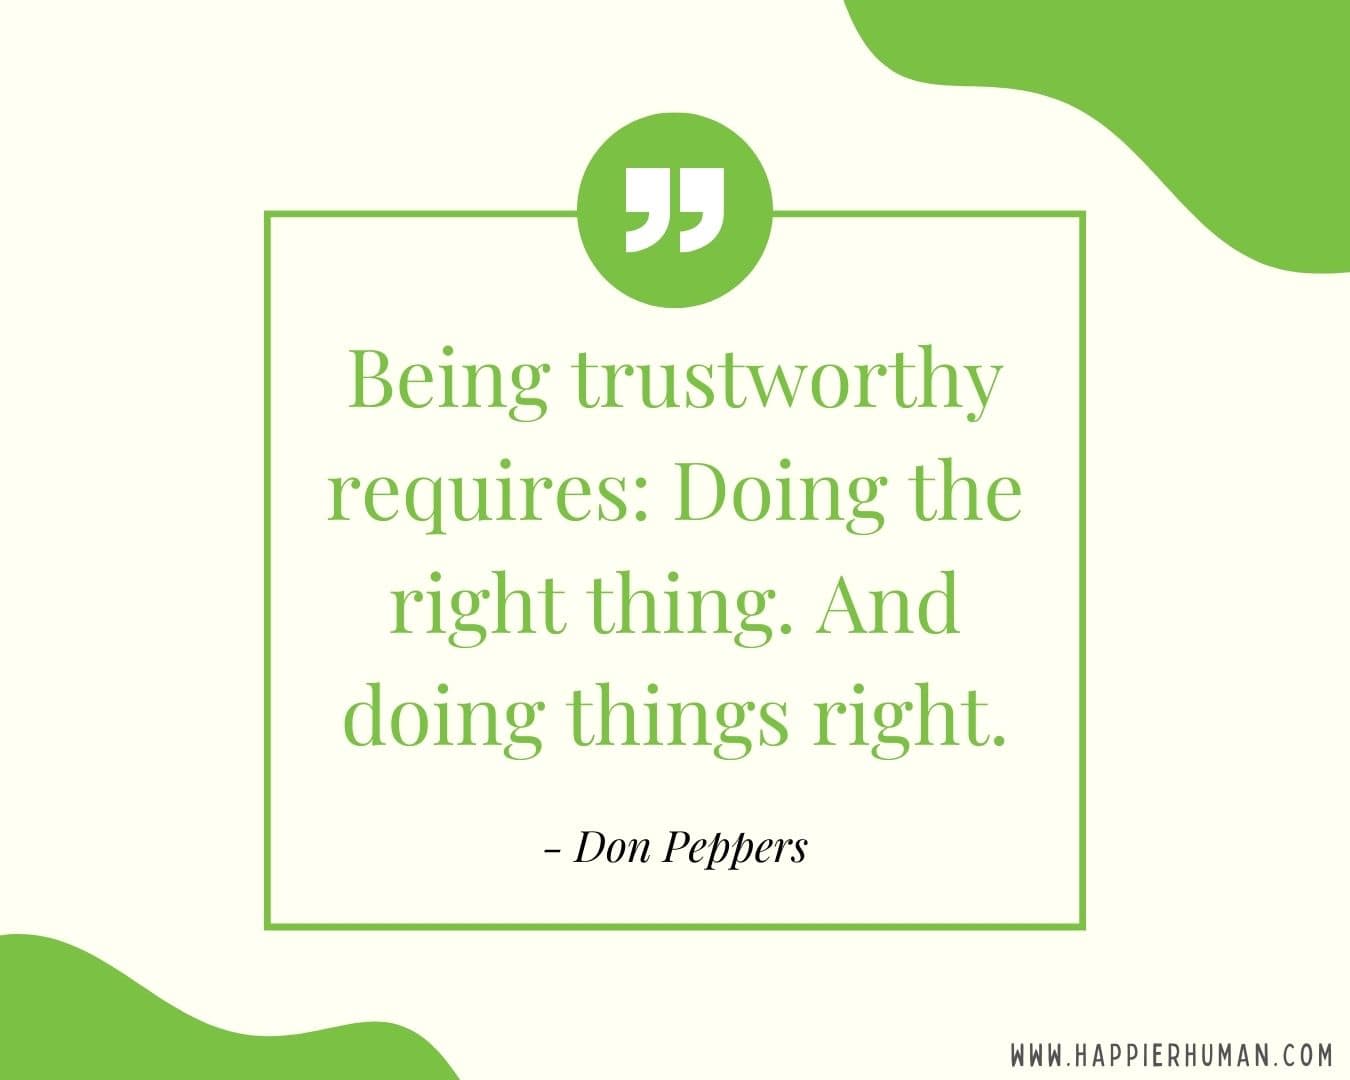 Broken Trust Quotes - “Being trustworthy requires: Doing the right thing. And doing things right.” - Don Peppers